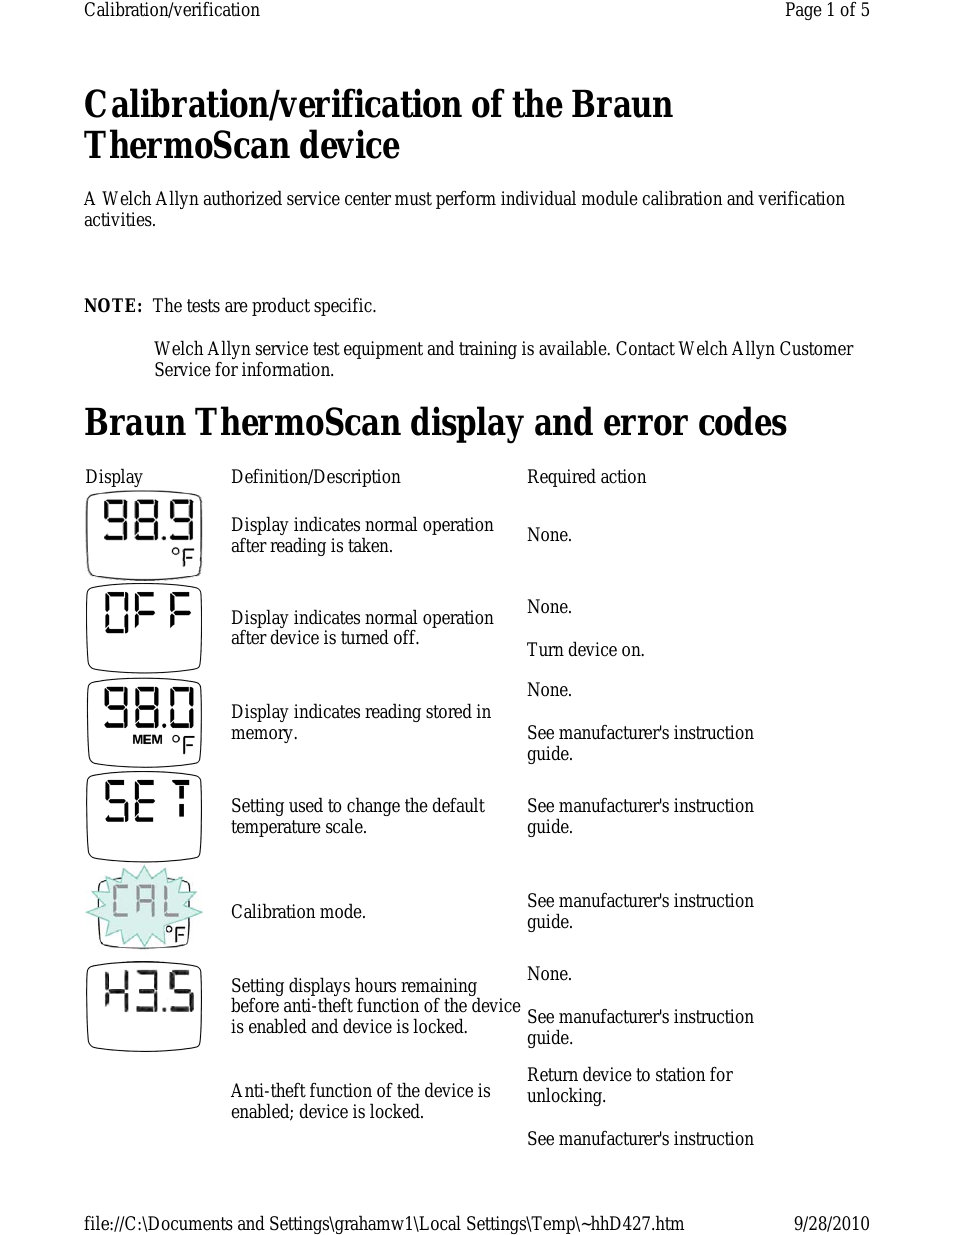 Calibration/Verification Braun Thermoscan - Quick Reference Guide